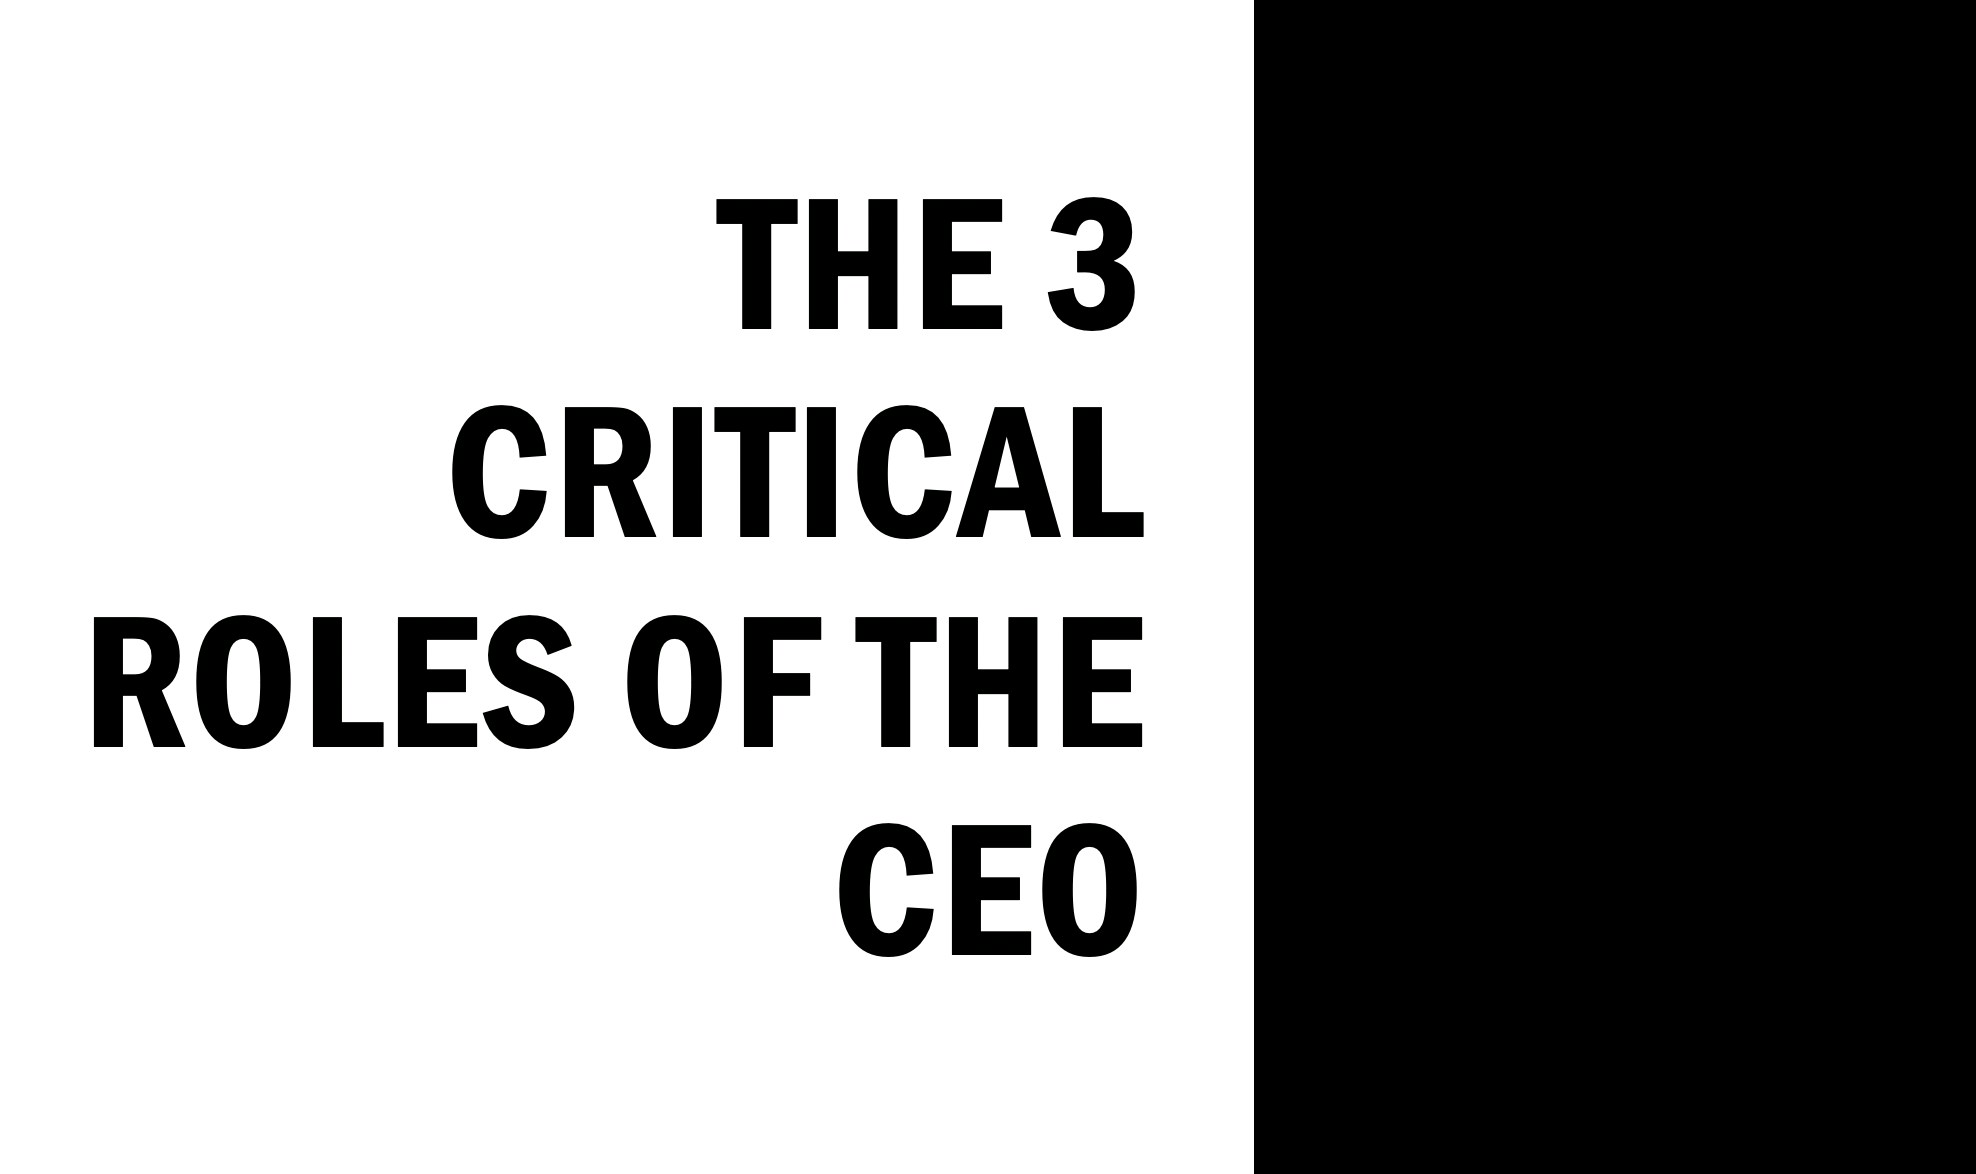 The 3 Critical Roles of the CEO